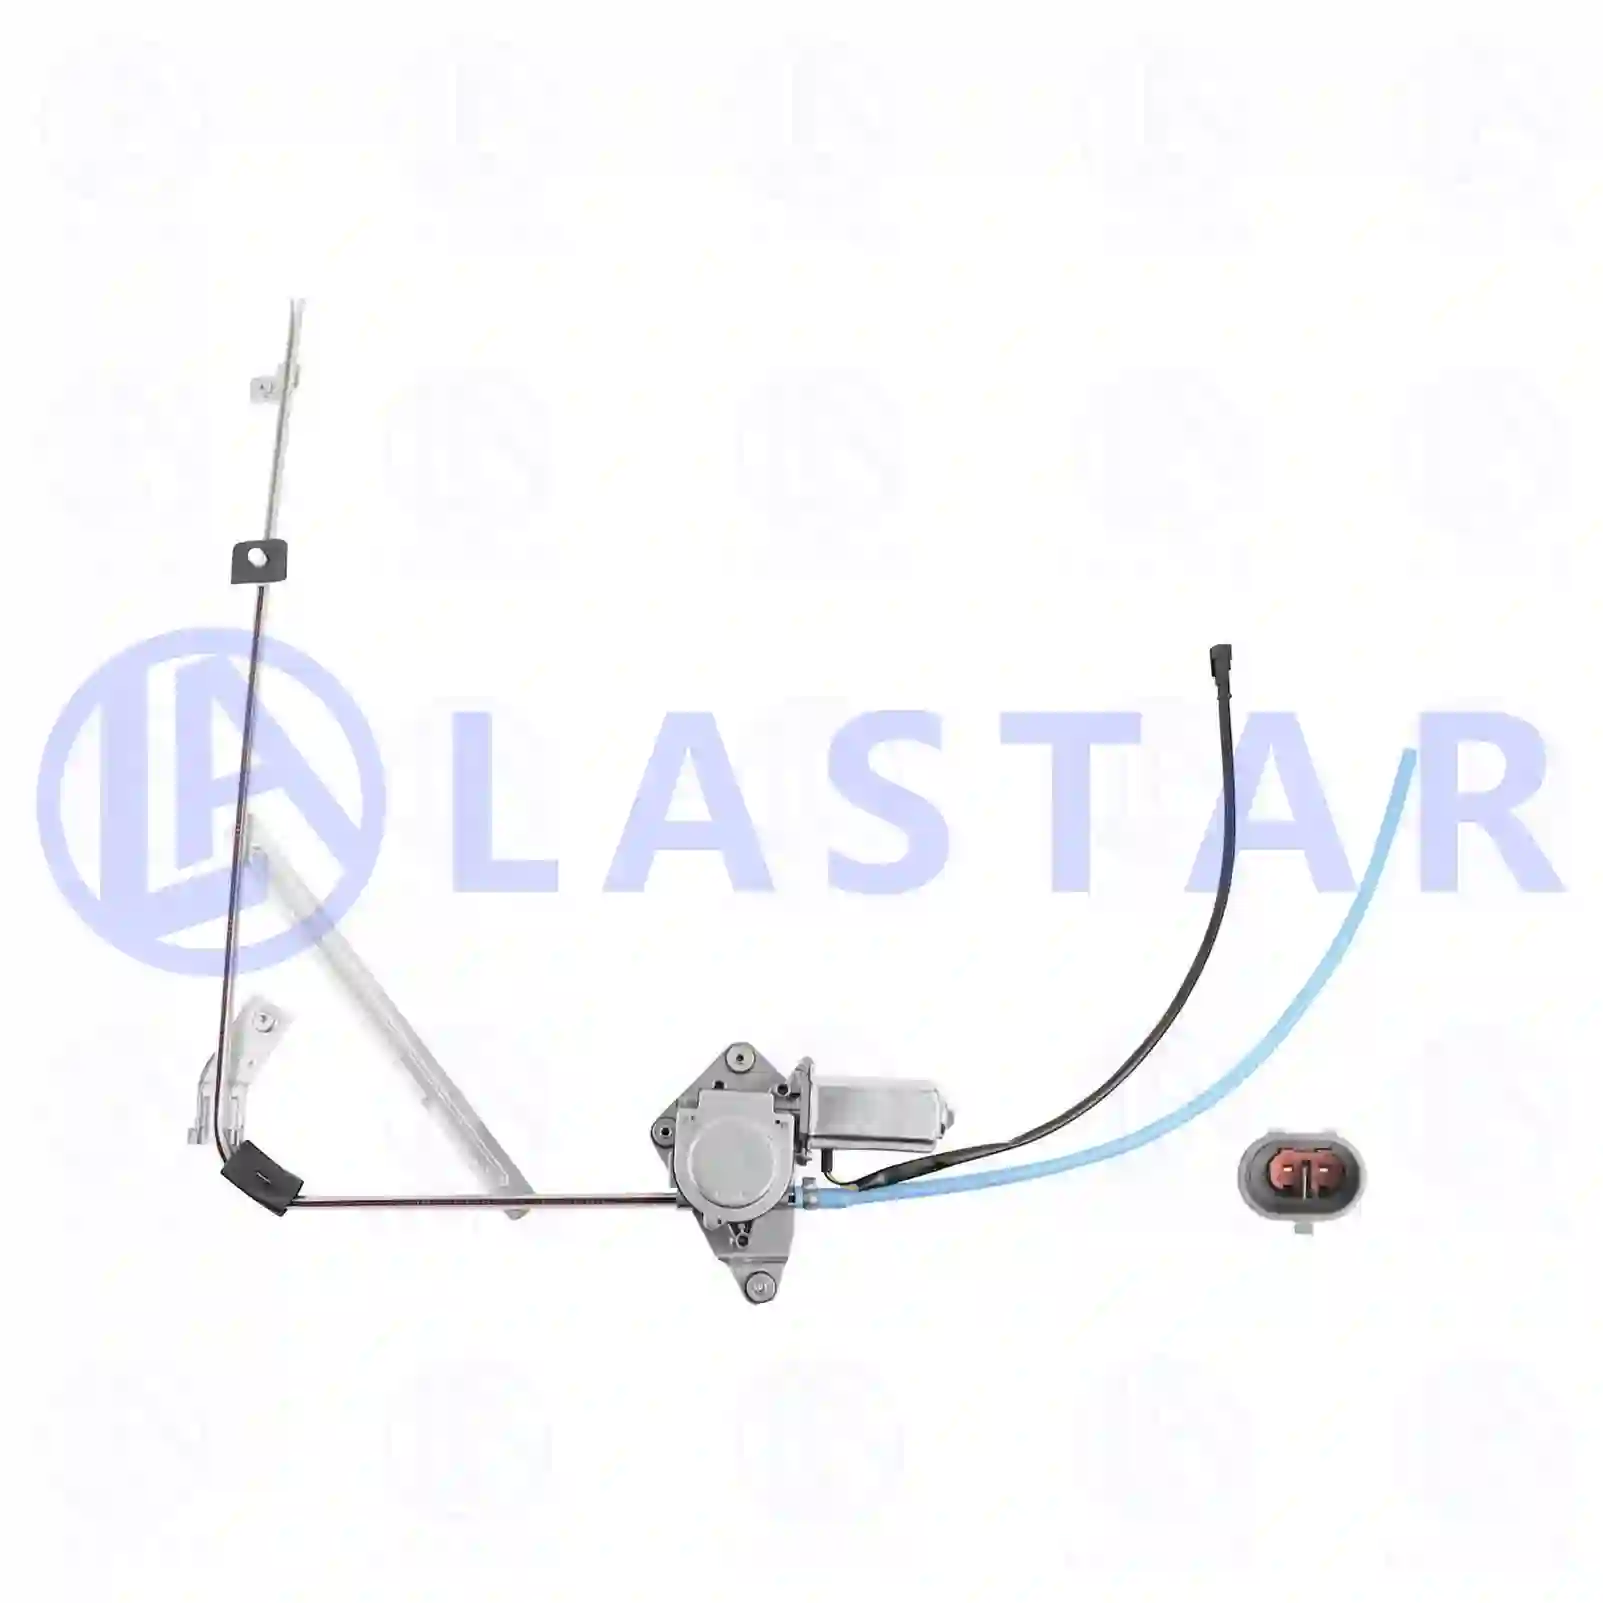 Window regulator, right, electrical, with motor, 77720636, 02997195, 2997195, 98407721, 99487780, ZG61322-0008 ||  77720636 Lastar Spare Part | Truck Spare Parts, Auotomotive Spare Parts Window regulator, right, electrical, with motor, 77720636, 02997195, 2997195, 98407721, 99487780, ZG61322-0008 ||  77720636 Lastar Spare Part | Truck Spare Parts, Auotomotive Spare Parts